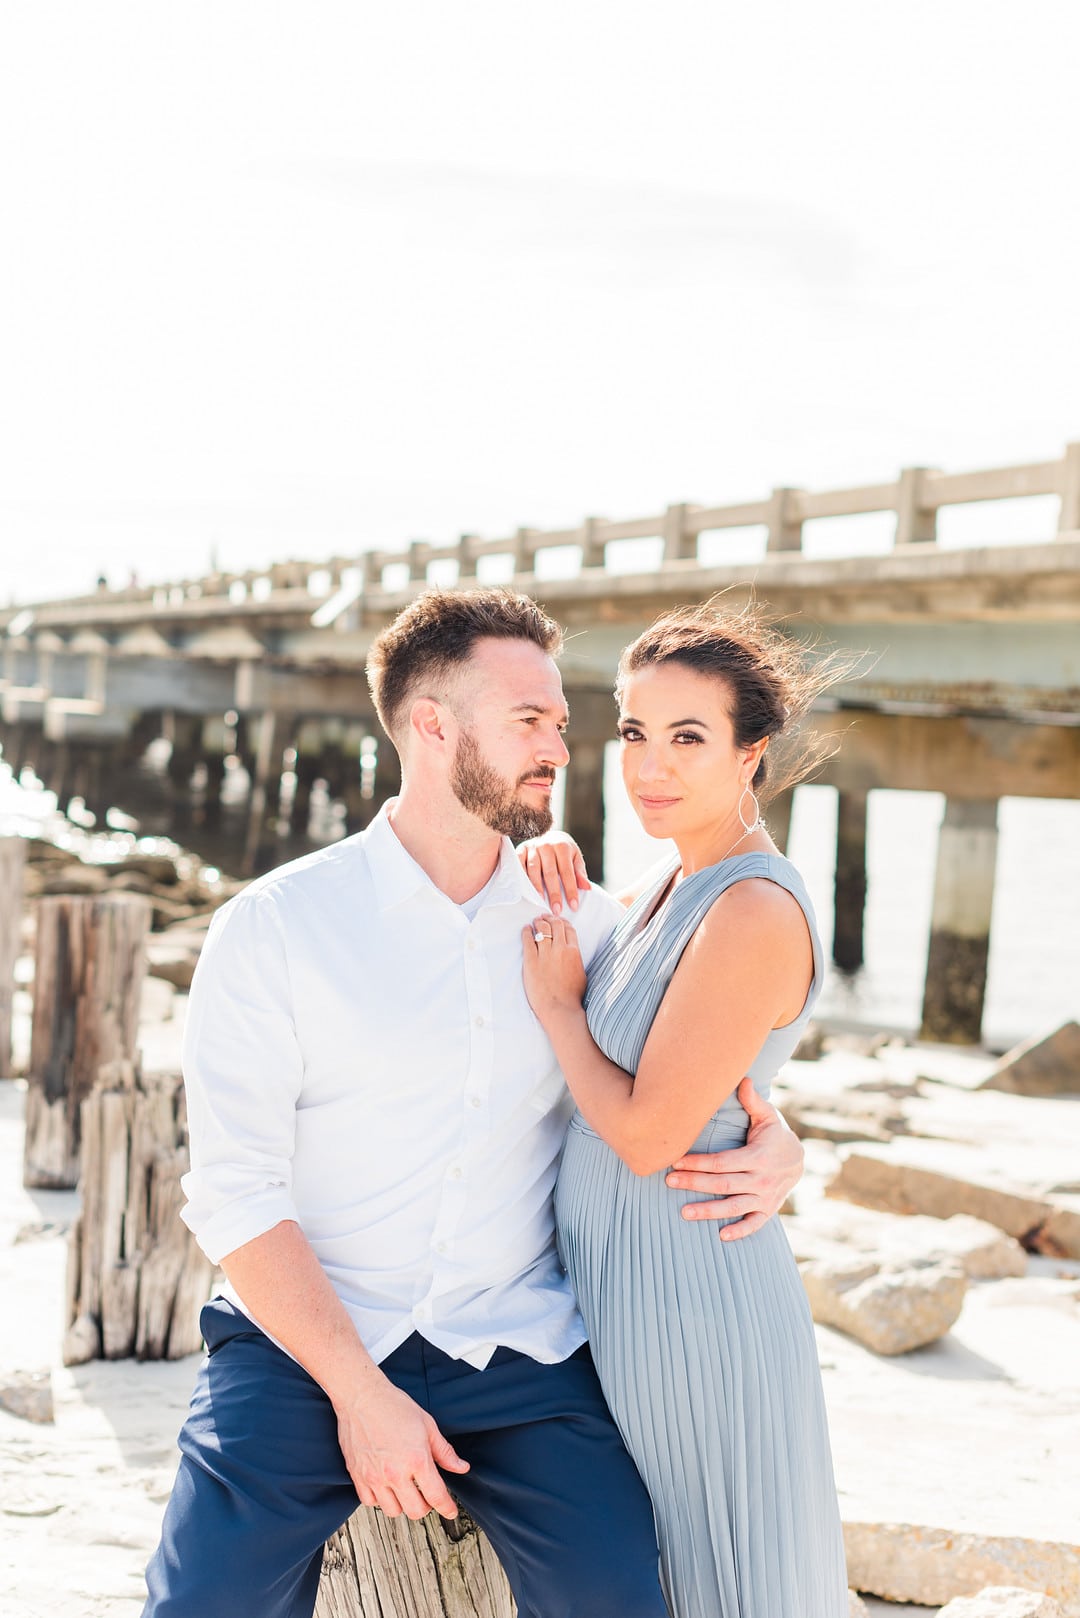 the guests dressed in blue to match the theme of the amelia island beach wedding inspiration shoot